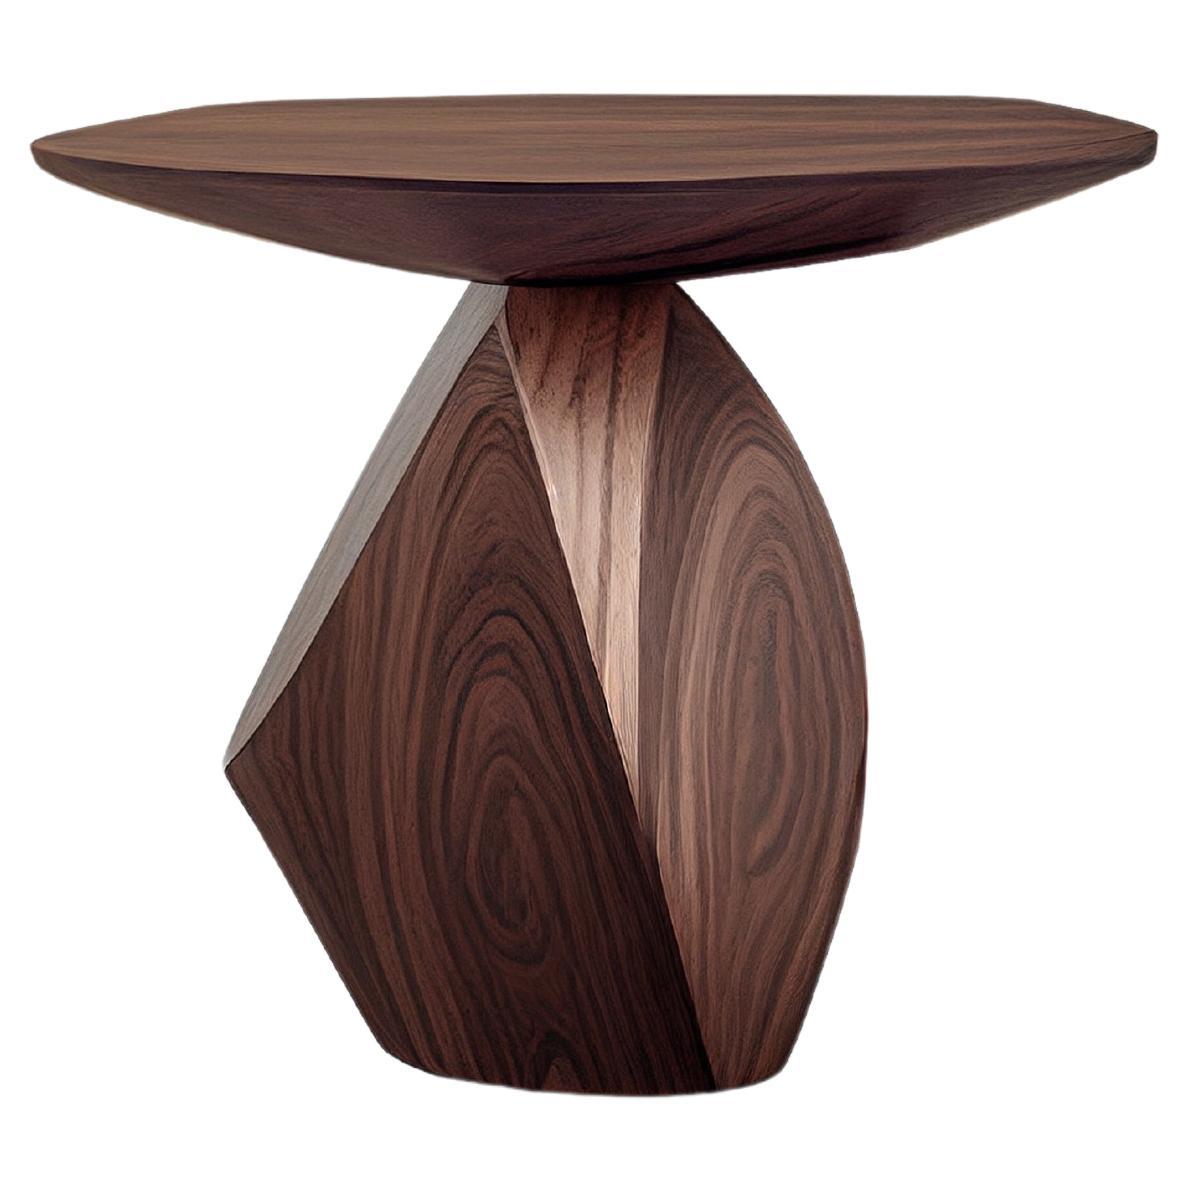 Artful Design Solace 3: Solid Walnut Auxiliary Table with Unique Wood Grain For Sale